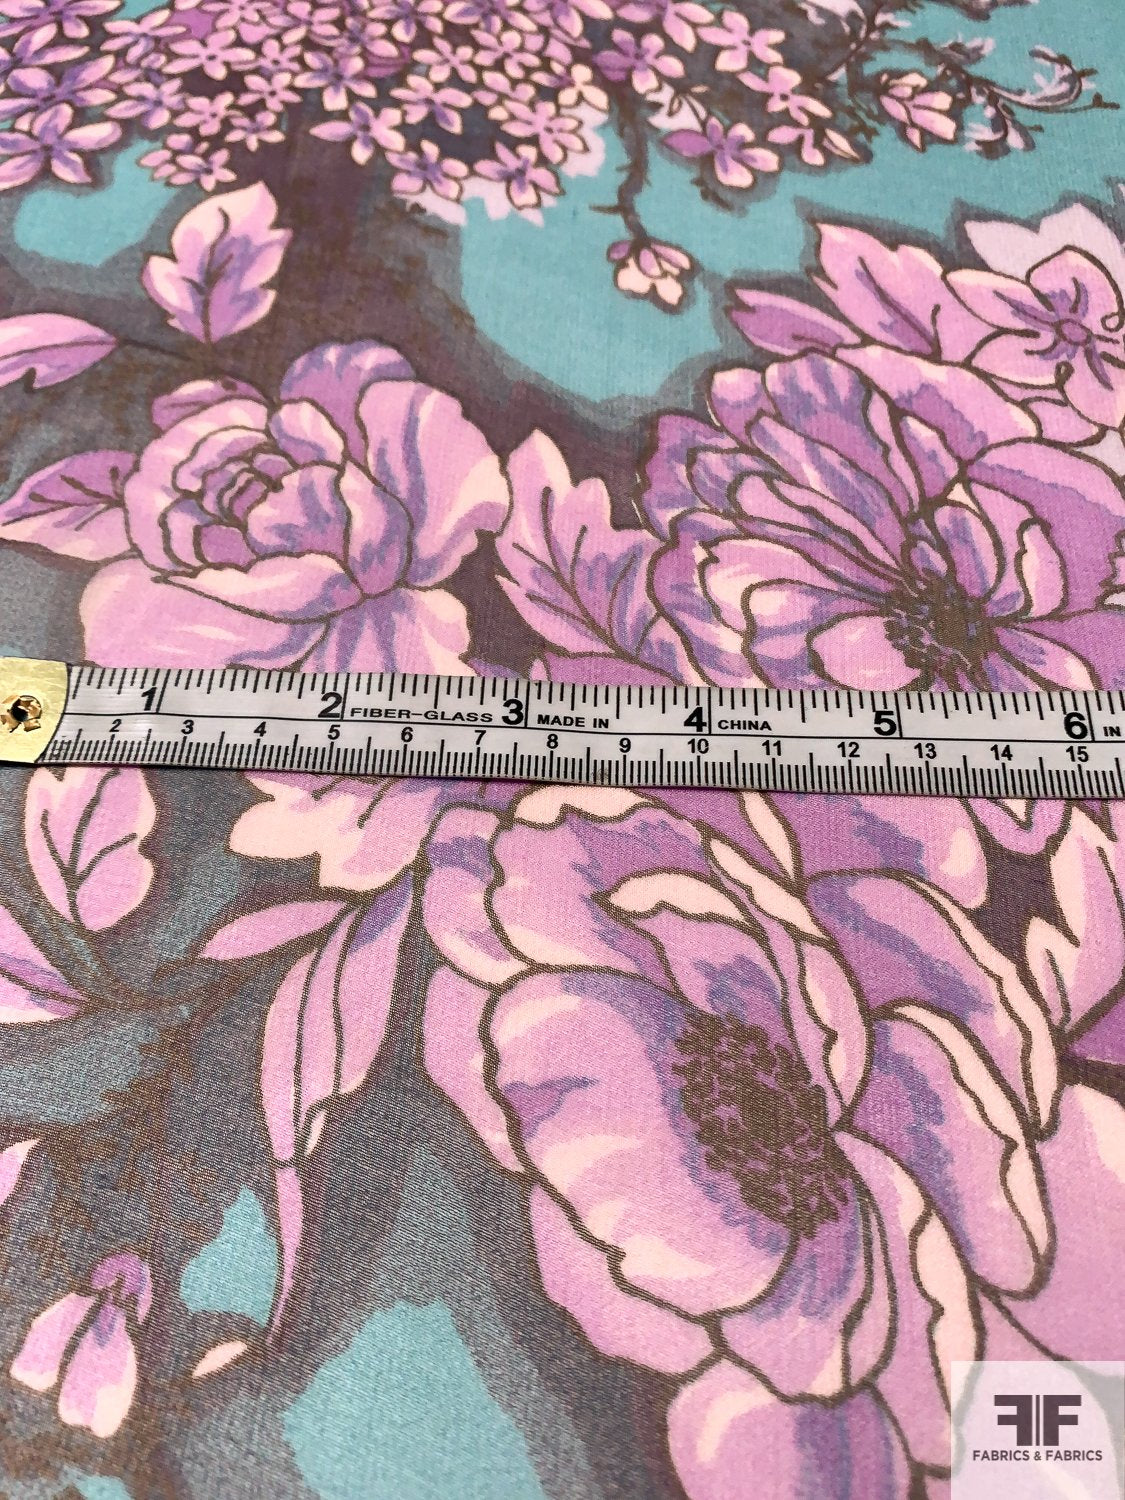 Trailing Floral Printed Silk Chiffon - Turquoise / Plum / Orchid